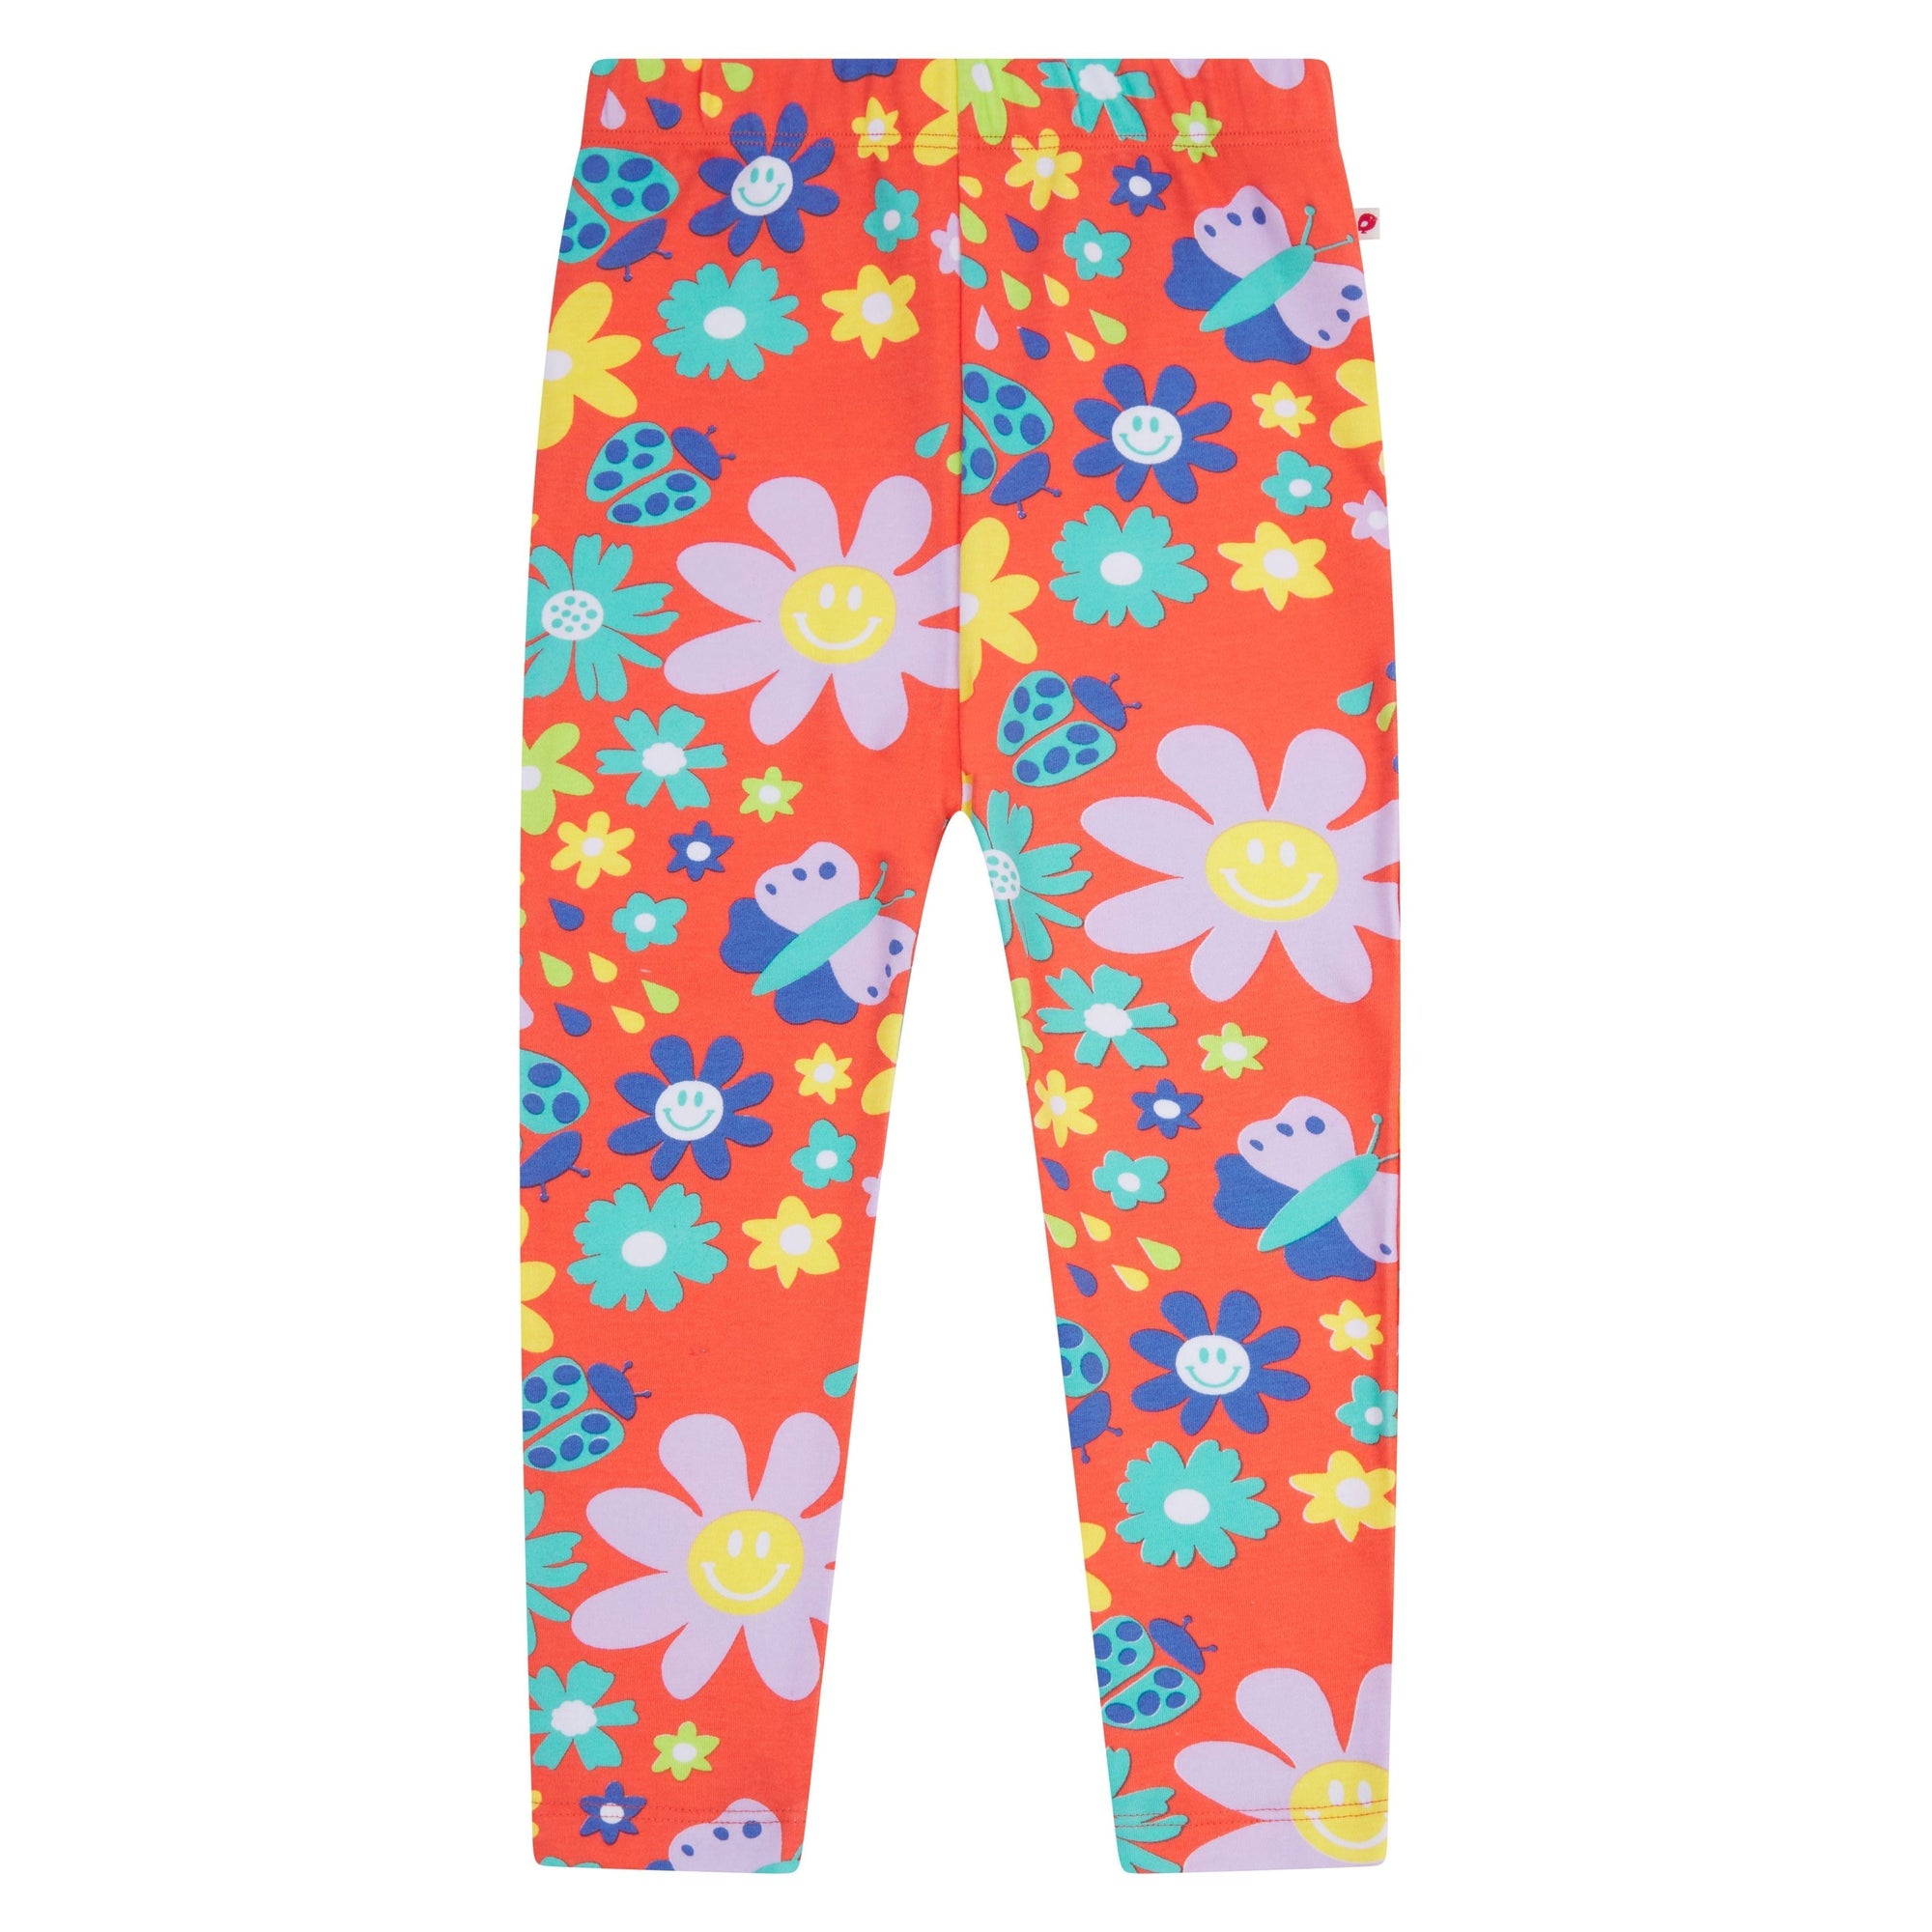 Flower Power Leggings - 1 Left Size 3-4 years-Piccalilly-Modern Rascals